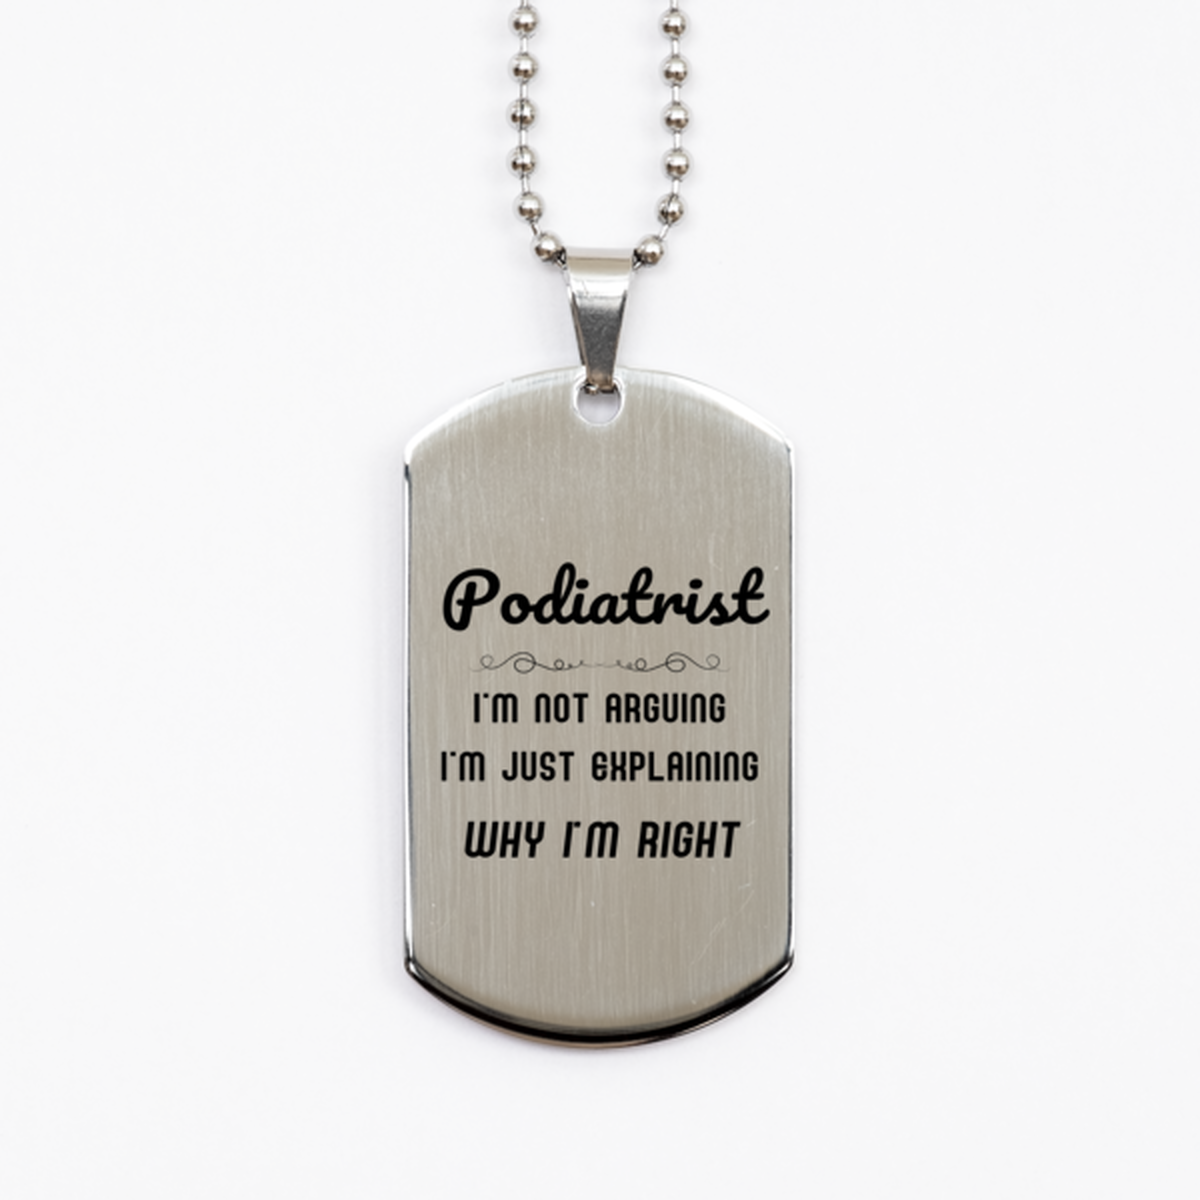 Podiatrist I'm not Arguing. I'm Just Explaining Why I'm RIGHT Silver Dog Tag, Funny Saying Quote Podiatrist Gifts For Podiatrist Graduation Birthday Christmas Gifts for Men Women Coworker